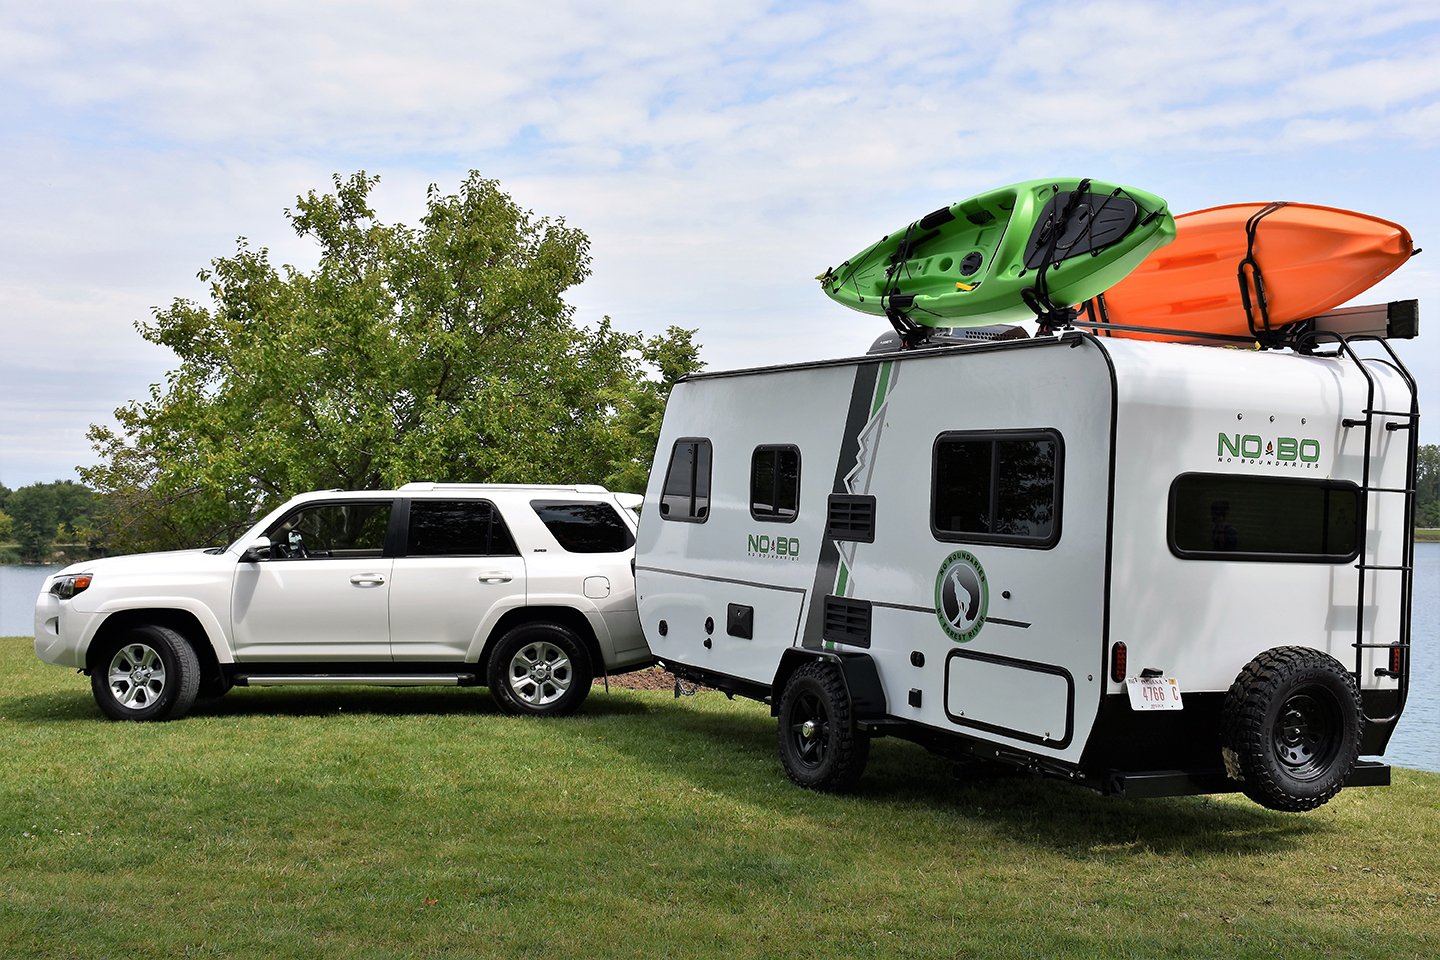 While most RVs requires a pickup truck to tow, some lightweight ones can be towed by large SUVs